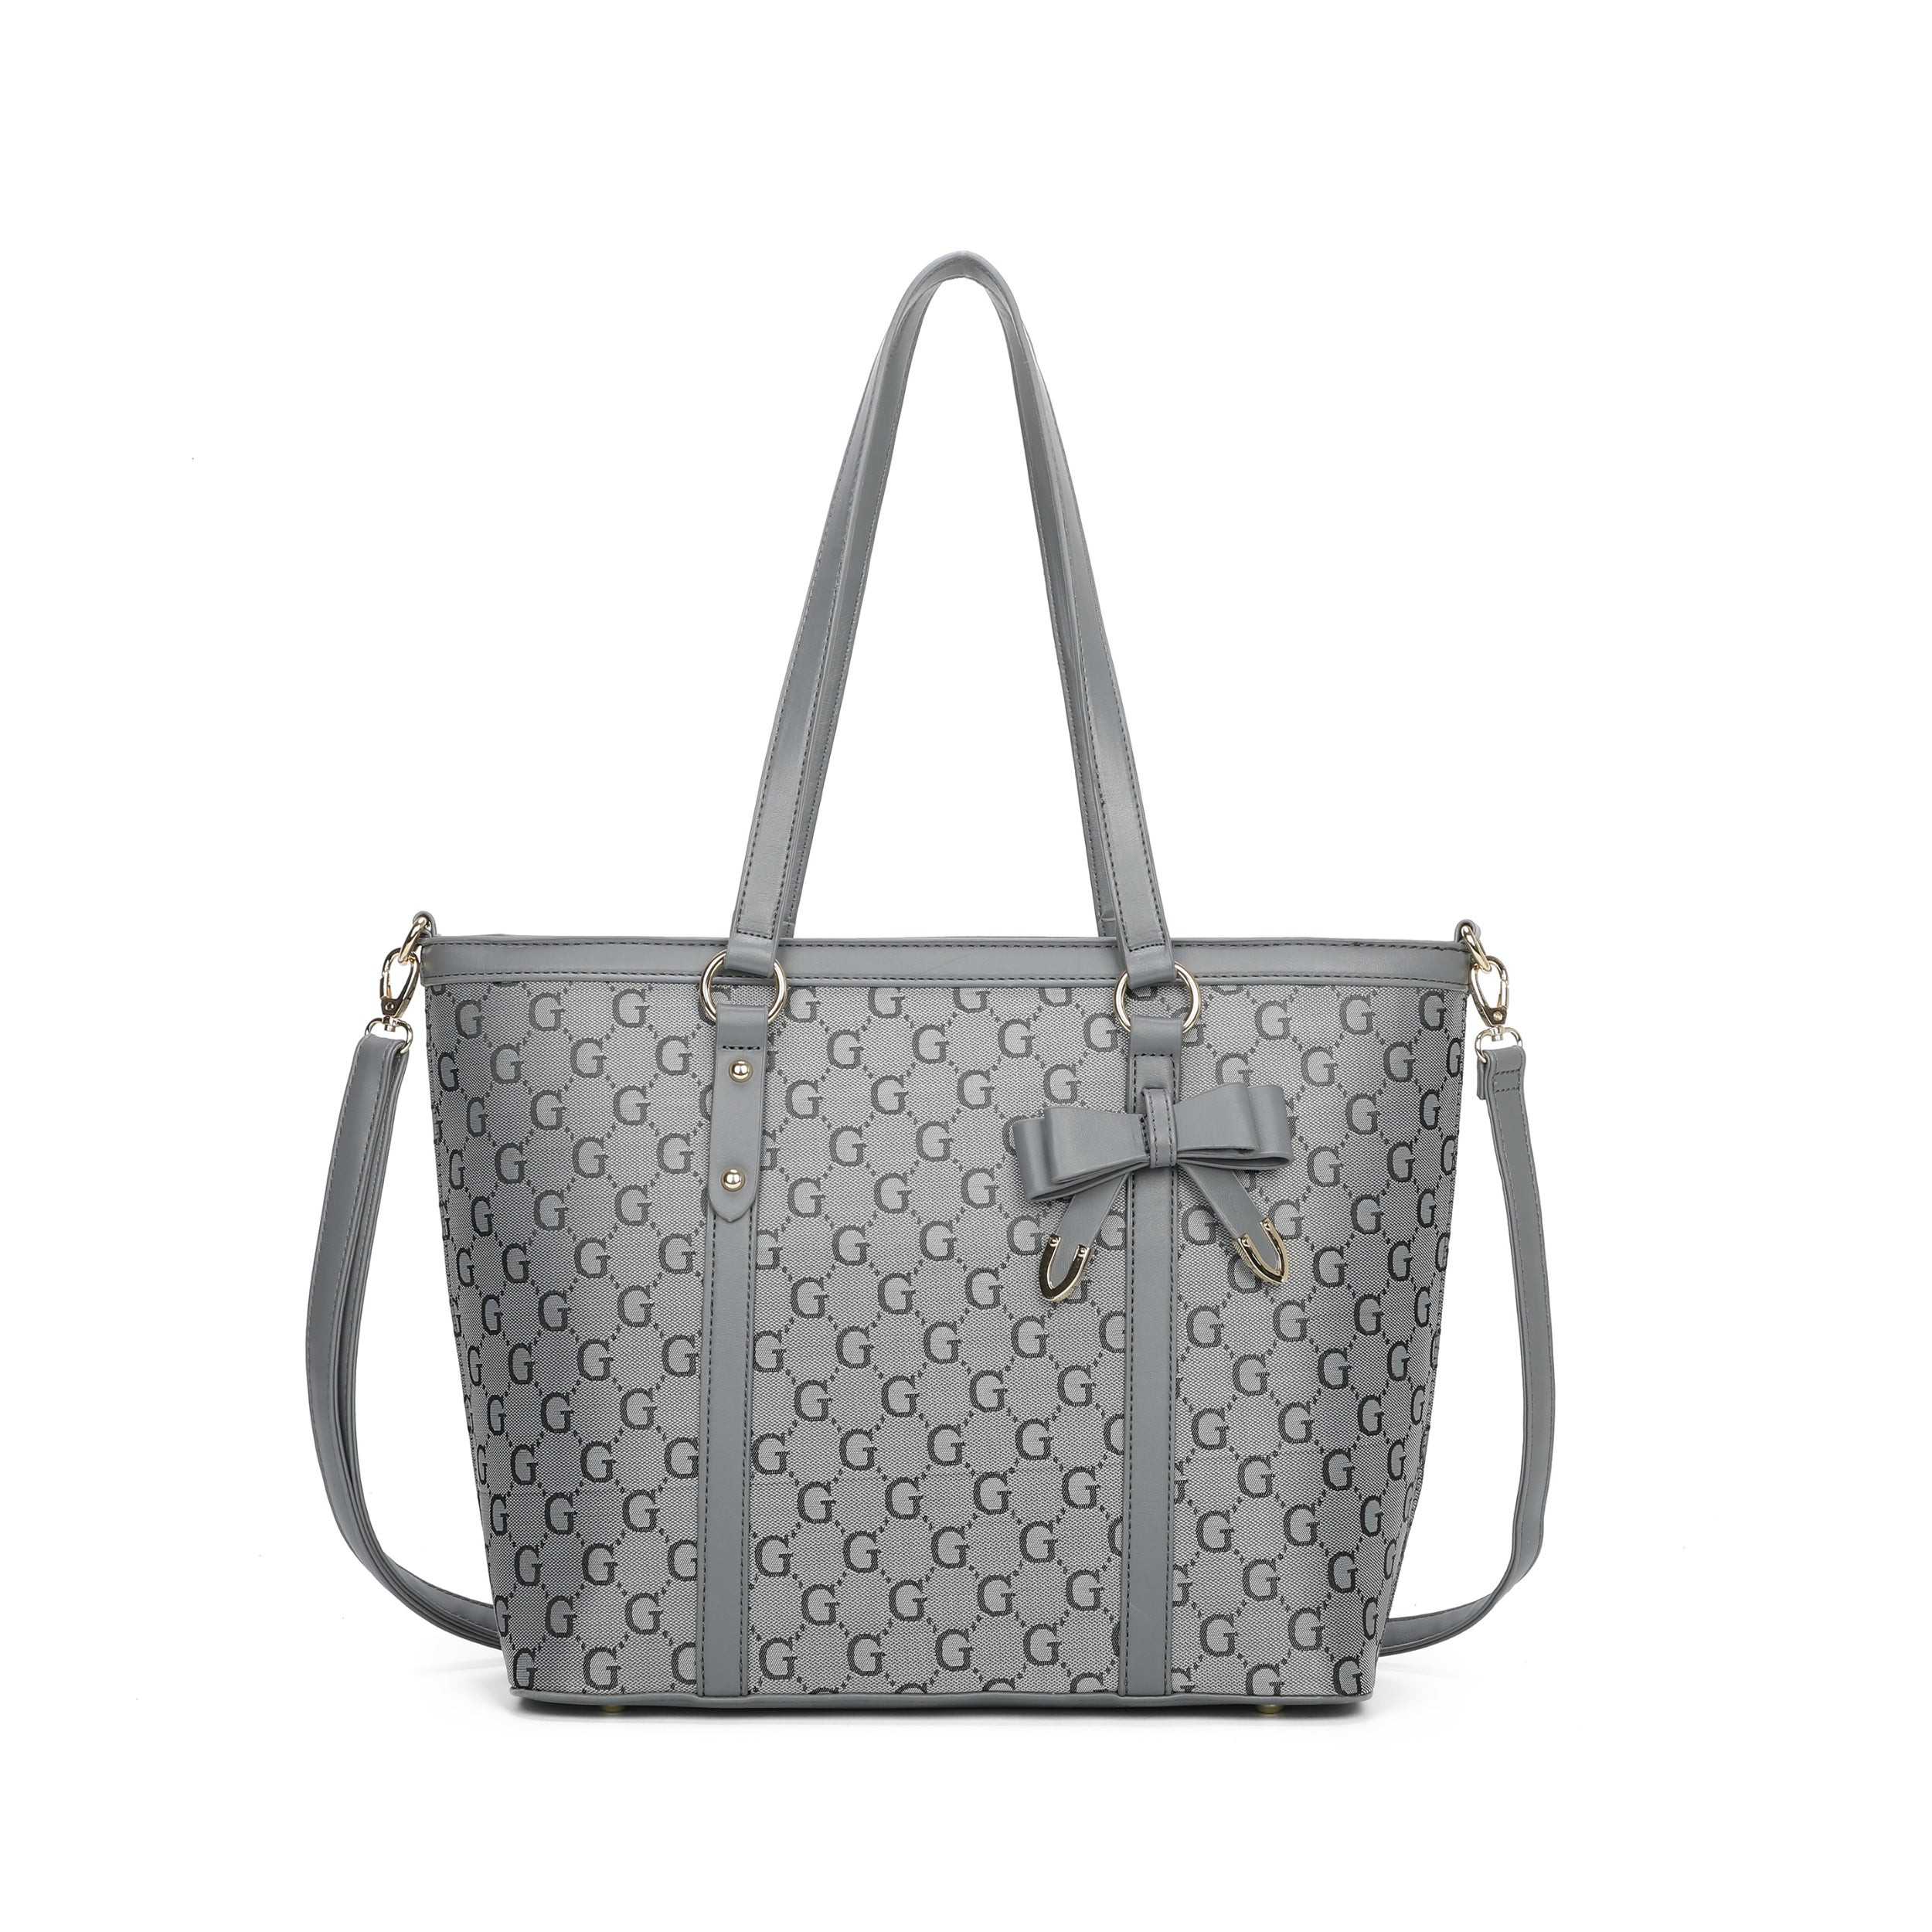 Craze London Fully lined interior Tote Bag